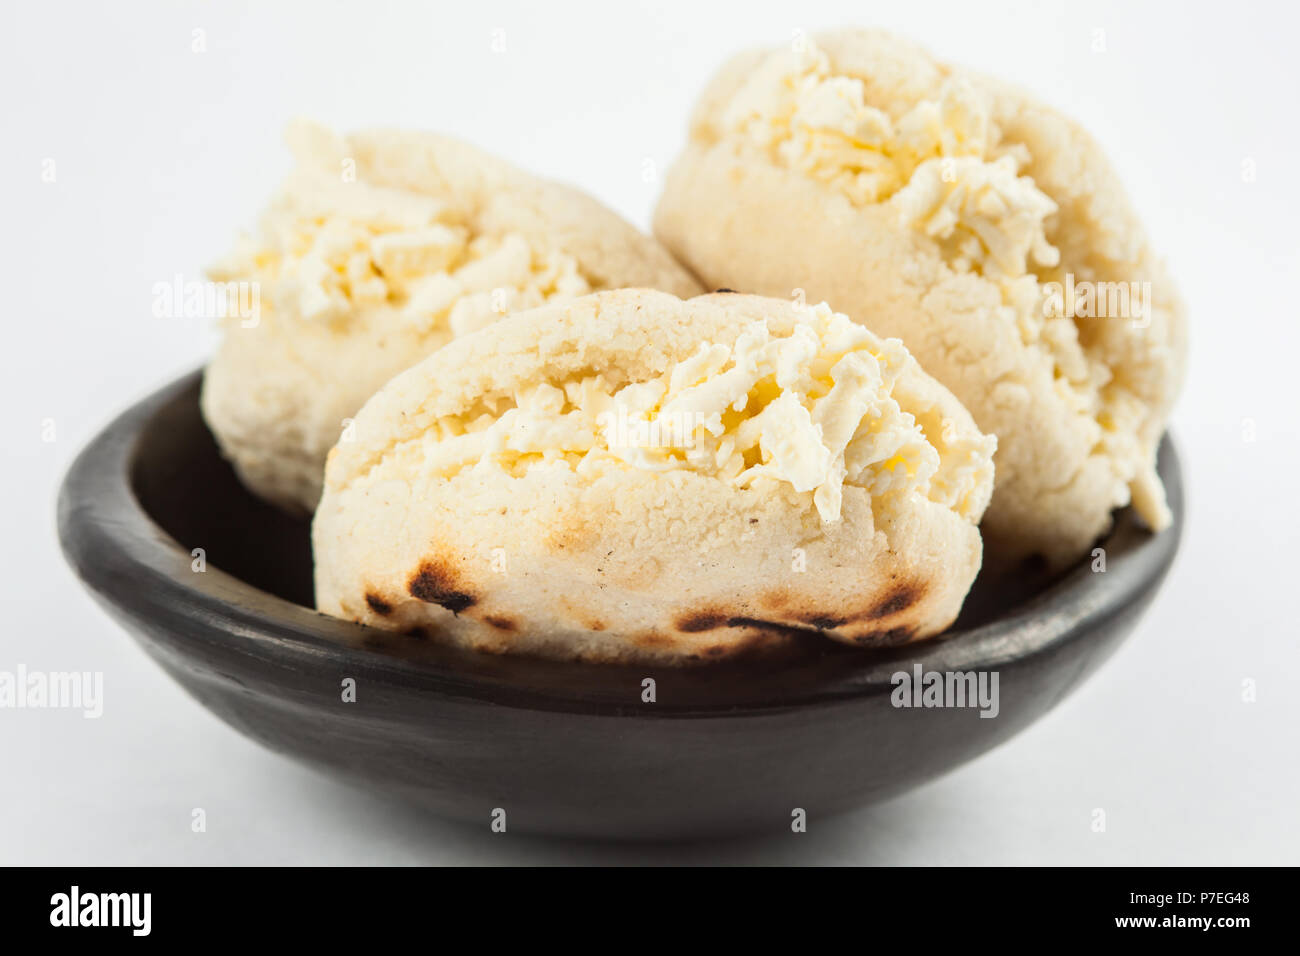 Arepas Stuffed with Cheese (Arepas Rellenas de Queso) - My